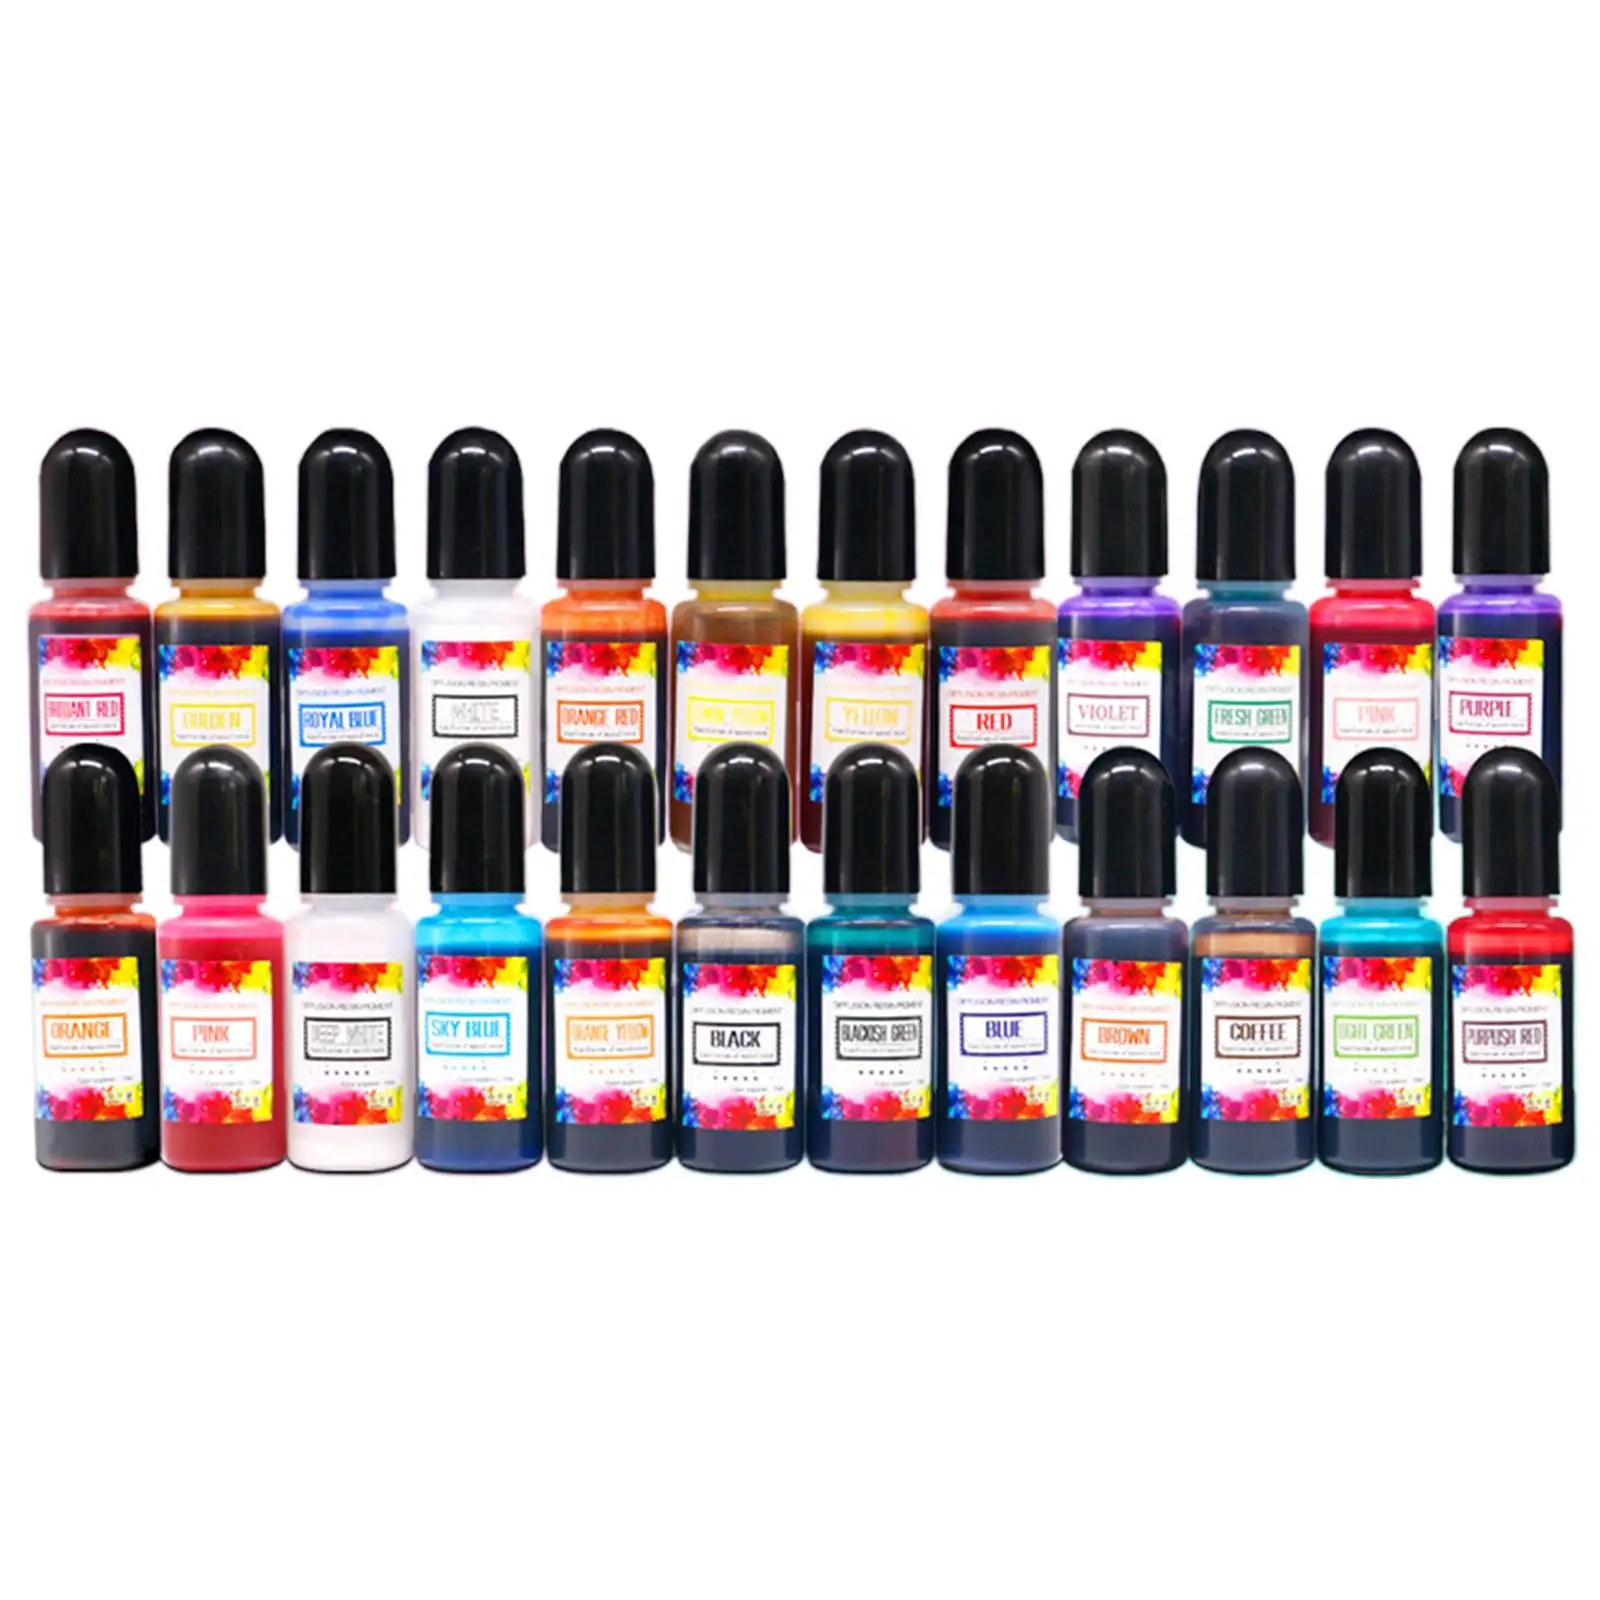 

24x Alcohol Inks Epoxy Resin Pigment Alcohol based Ink Resin Coloring 10ml Each for Dish Making Acrylic Painting DIY Art Crafts